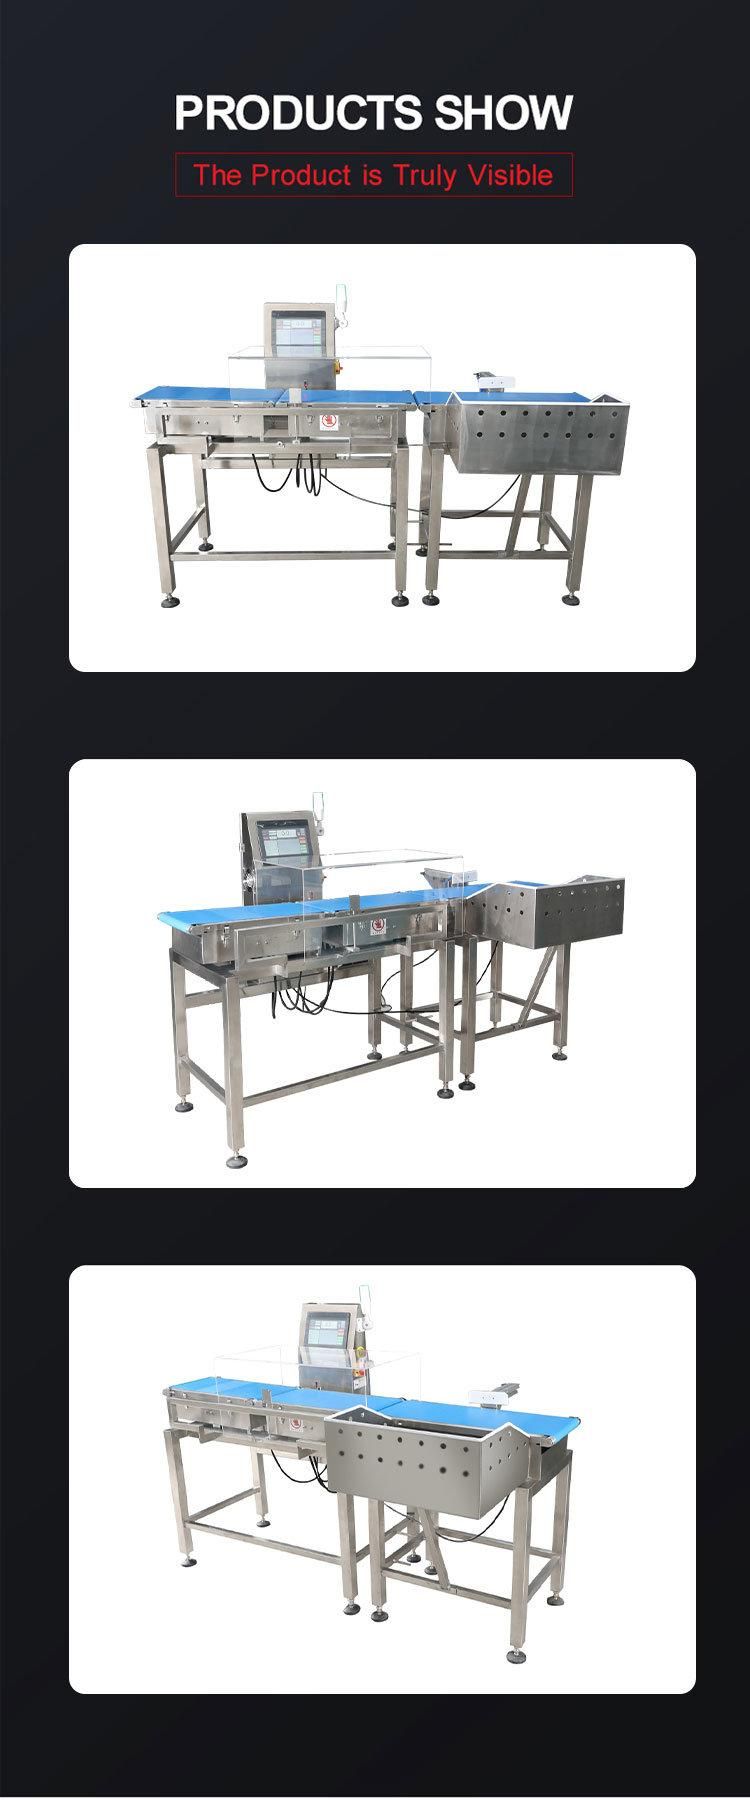 Automatic Portion Package Weight Checking Online Belt Dynamic with Over or Less Weight Rejector Check Weighing